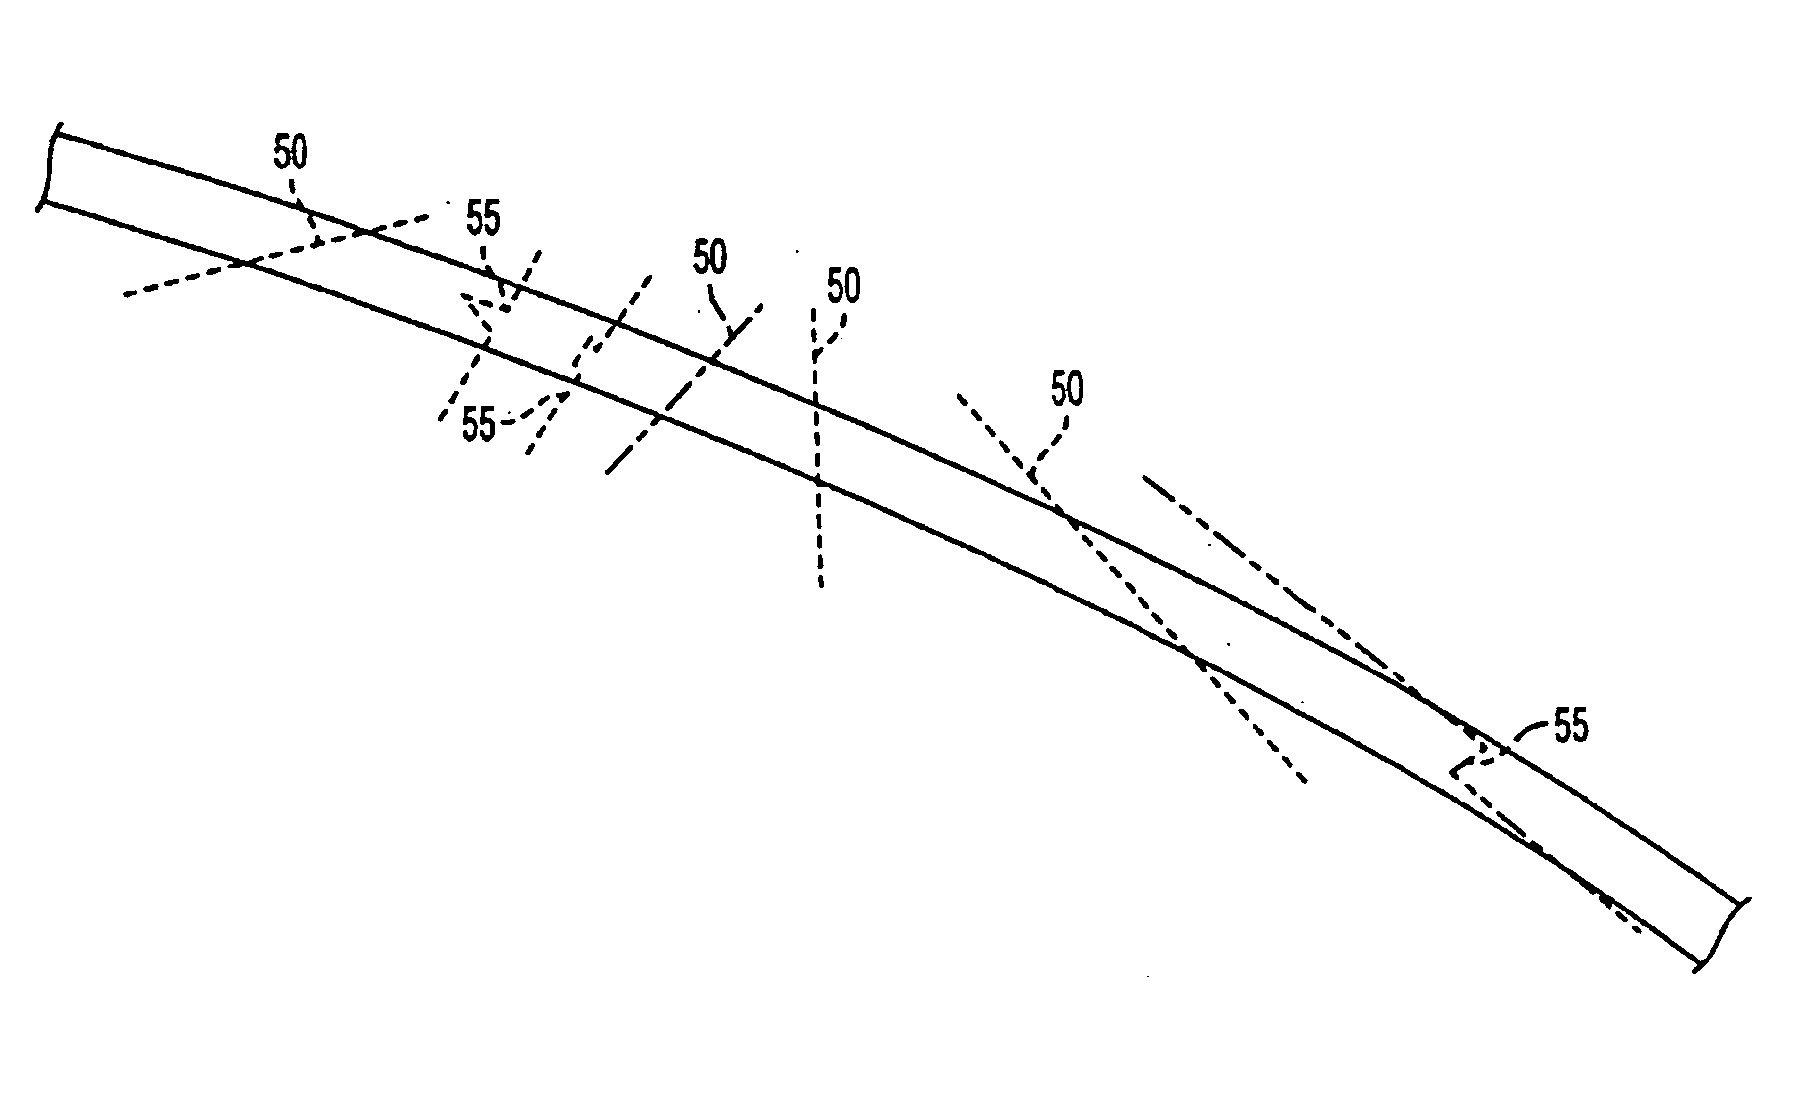 Hybrid contact lens system and method